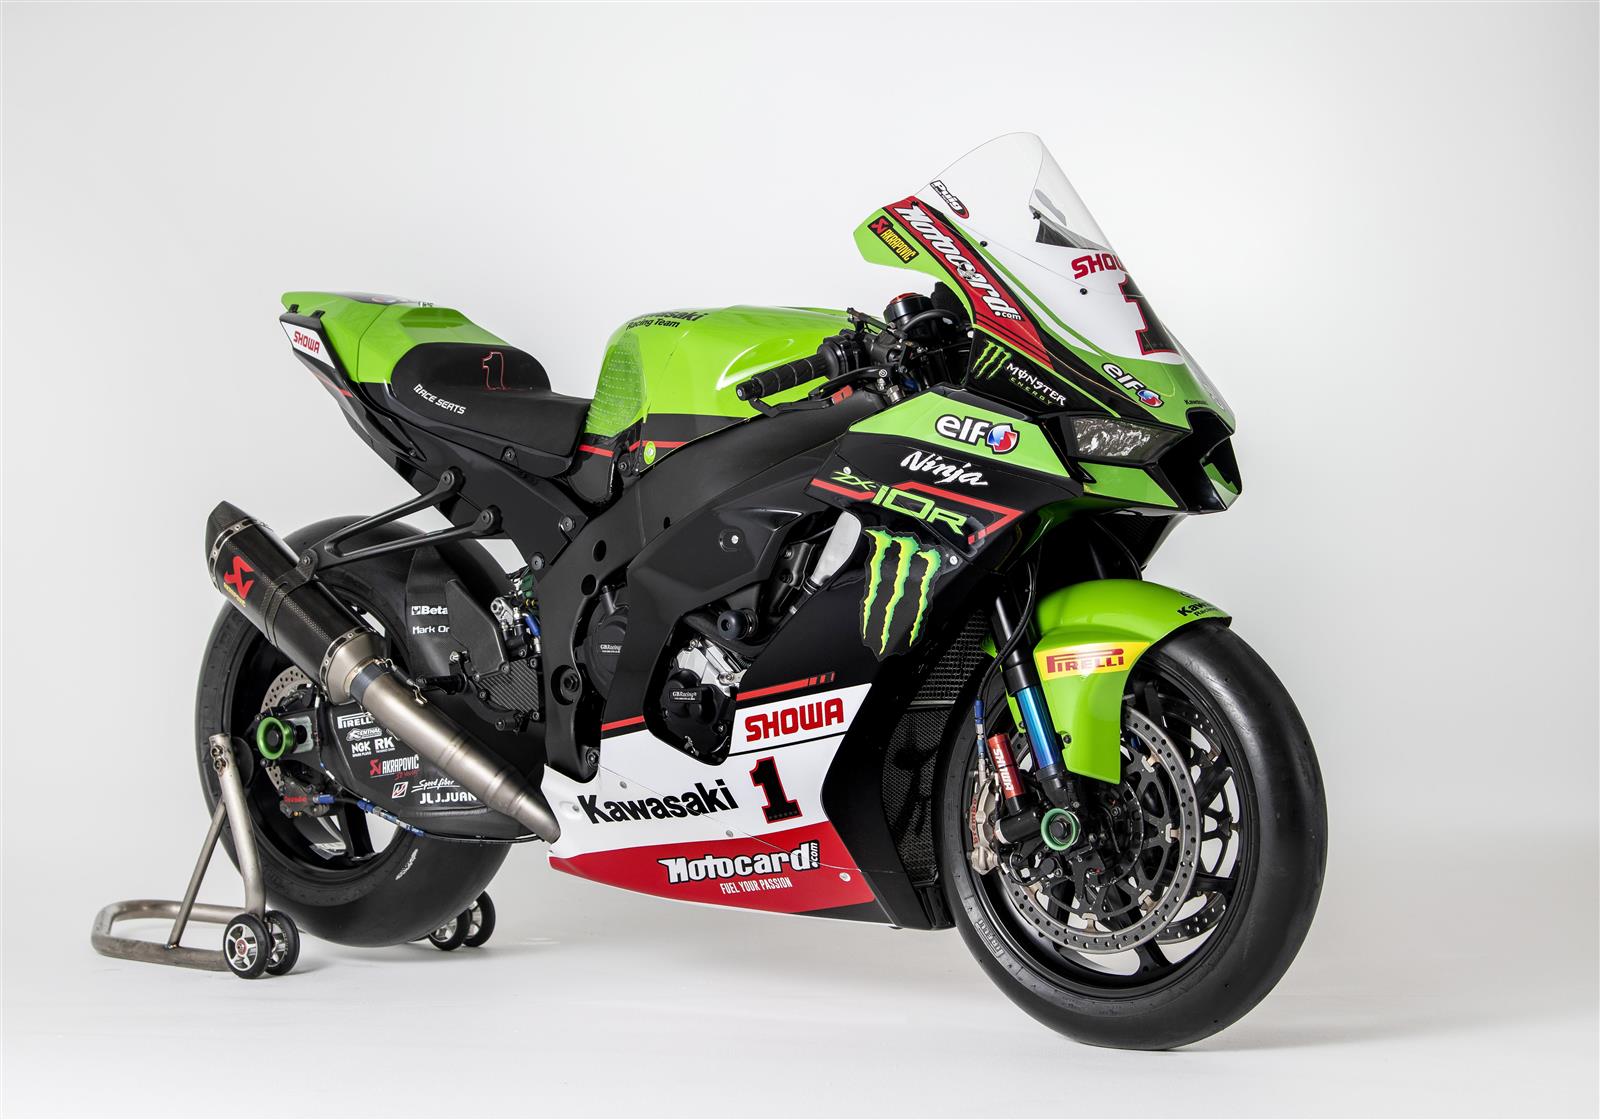 Formode Skim virkningsfuldhed Newsletter The official race report service of Kawasaki Racing Team.  Newsletter kawasaki Fill in the following fields to subscribe to Kawasaki  Newsletter. By submitting your data, you agree with the Kawasaki's privacy  policy and confirm you have read and ...